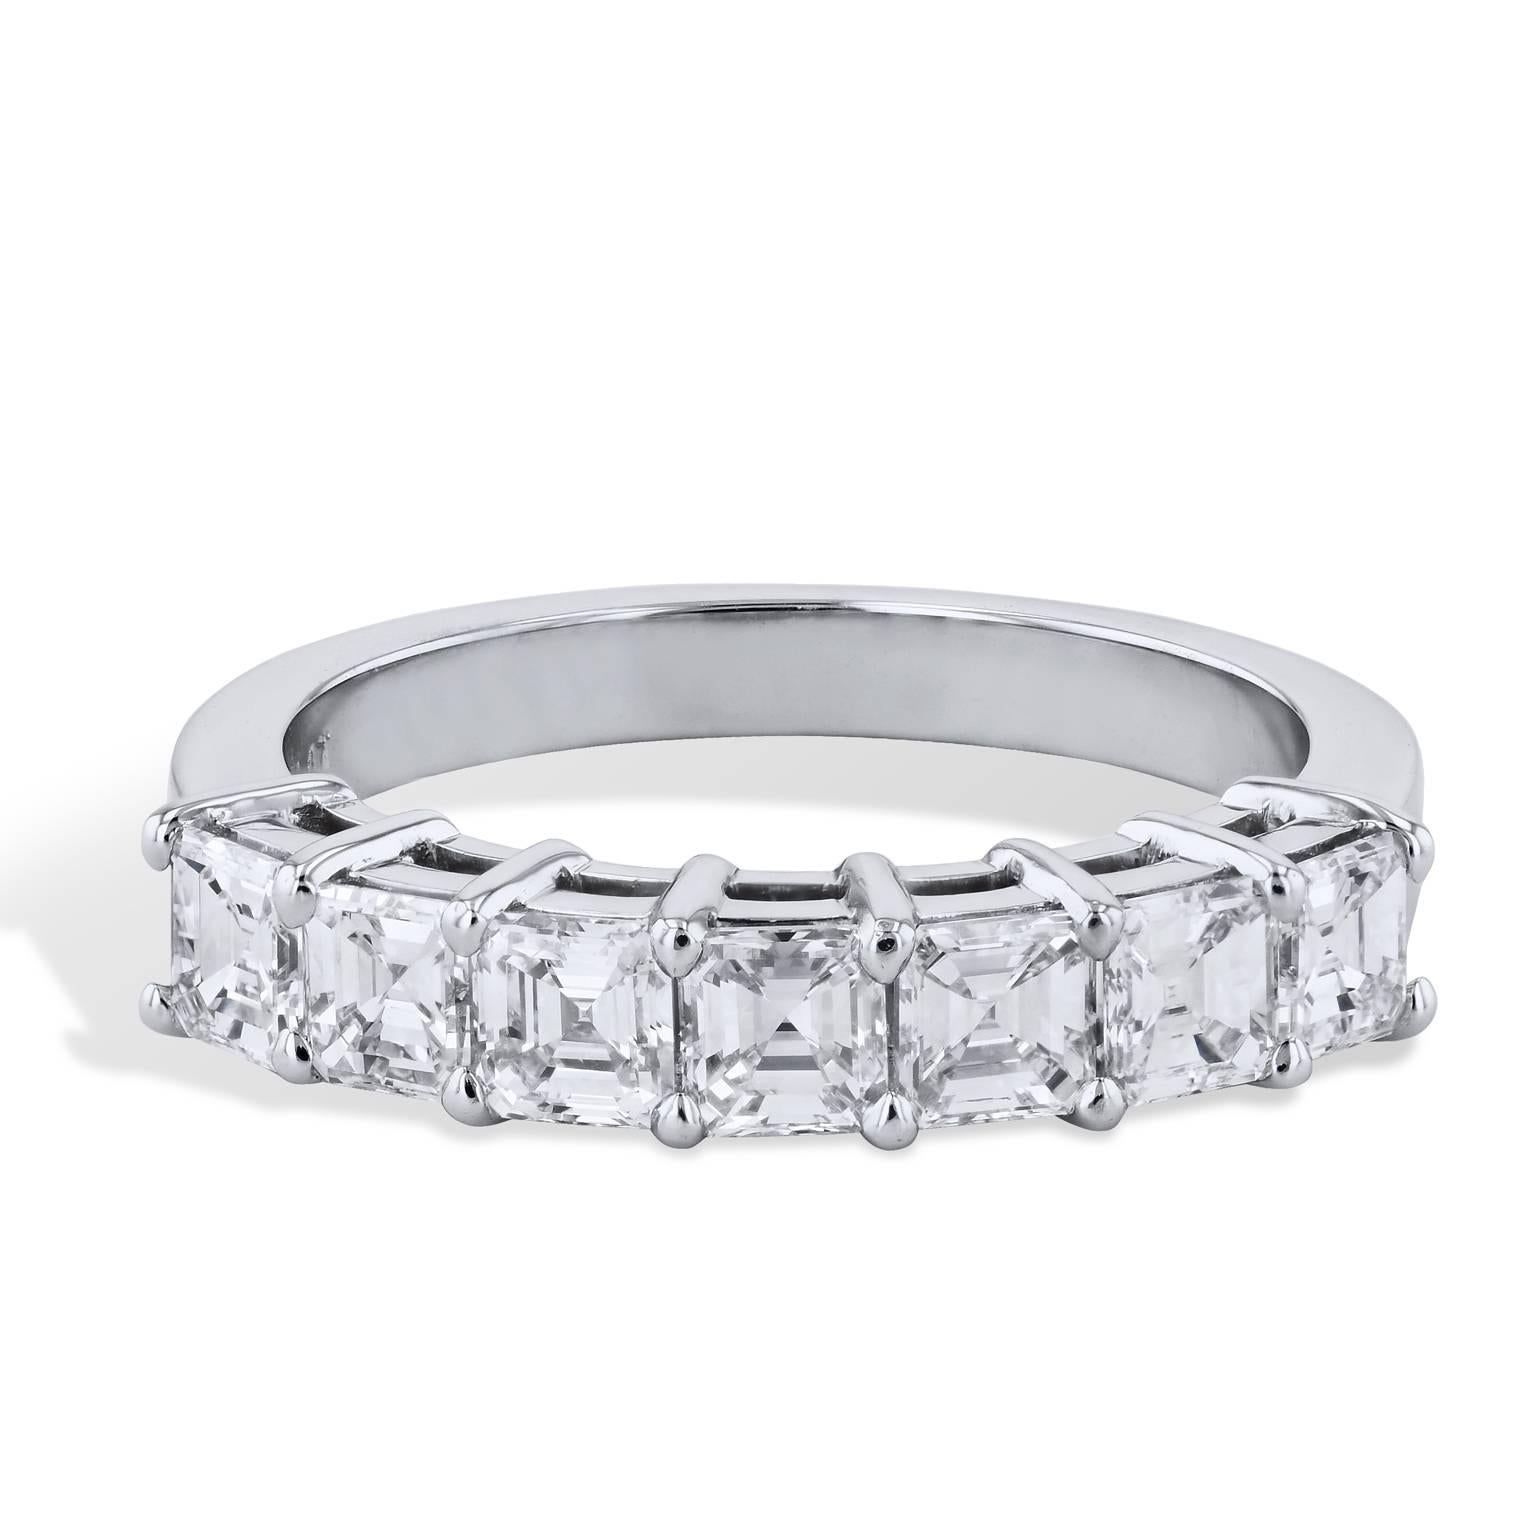 1.12 carat of square emerald cut diamond are affixed to a platinum shared-prong shank. This previously loved band ring provides a spectrum of light and color that glinters with pristine beauty (size 4).